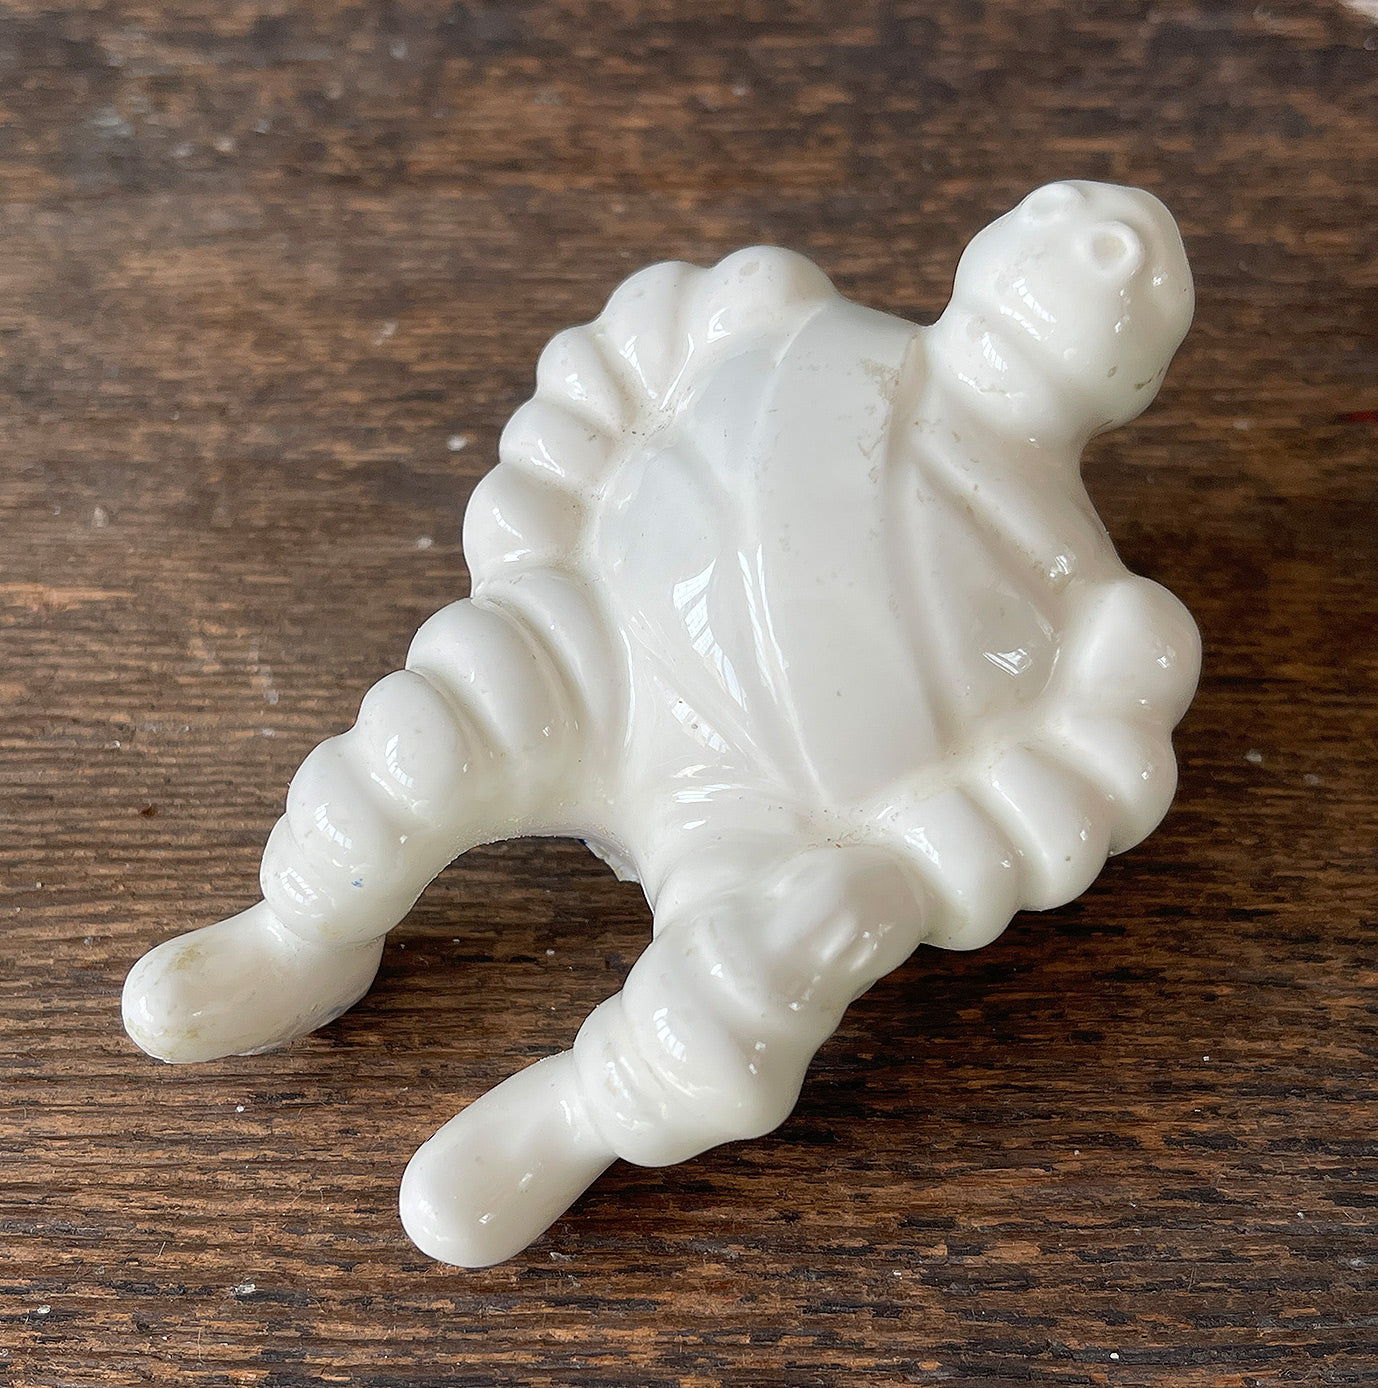 A Vintage Ceramic Bibendum Michelin Man with a hole in his bottom! This little fellow would have sat on an ashtray hence the hole is his bottom. He's now in the perfect position to sit on the edge of a shelf - SHOP NOW - www.intovintage.co.uk